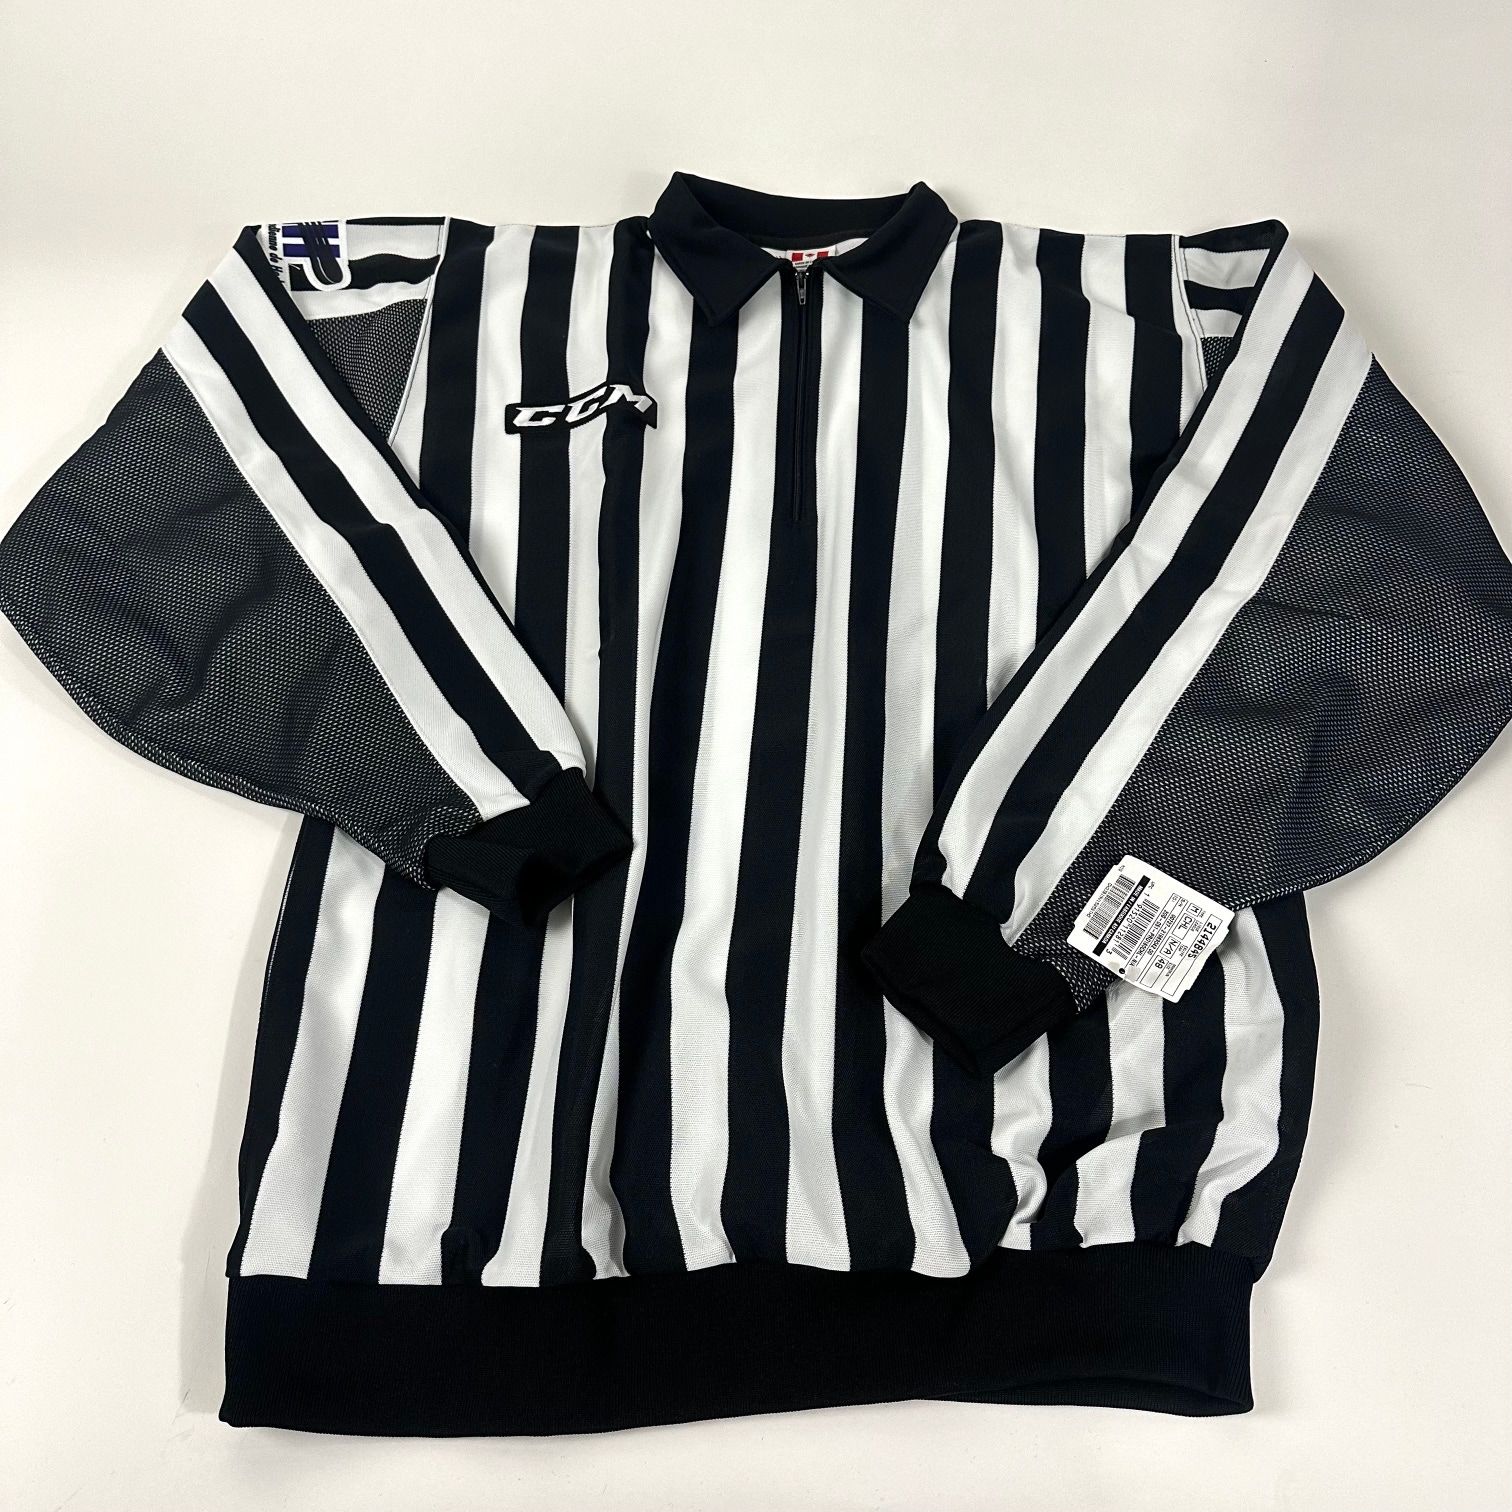 Brand New Pro Hockey Ref Jersey NO Arm Band - Multiple Sizes Available